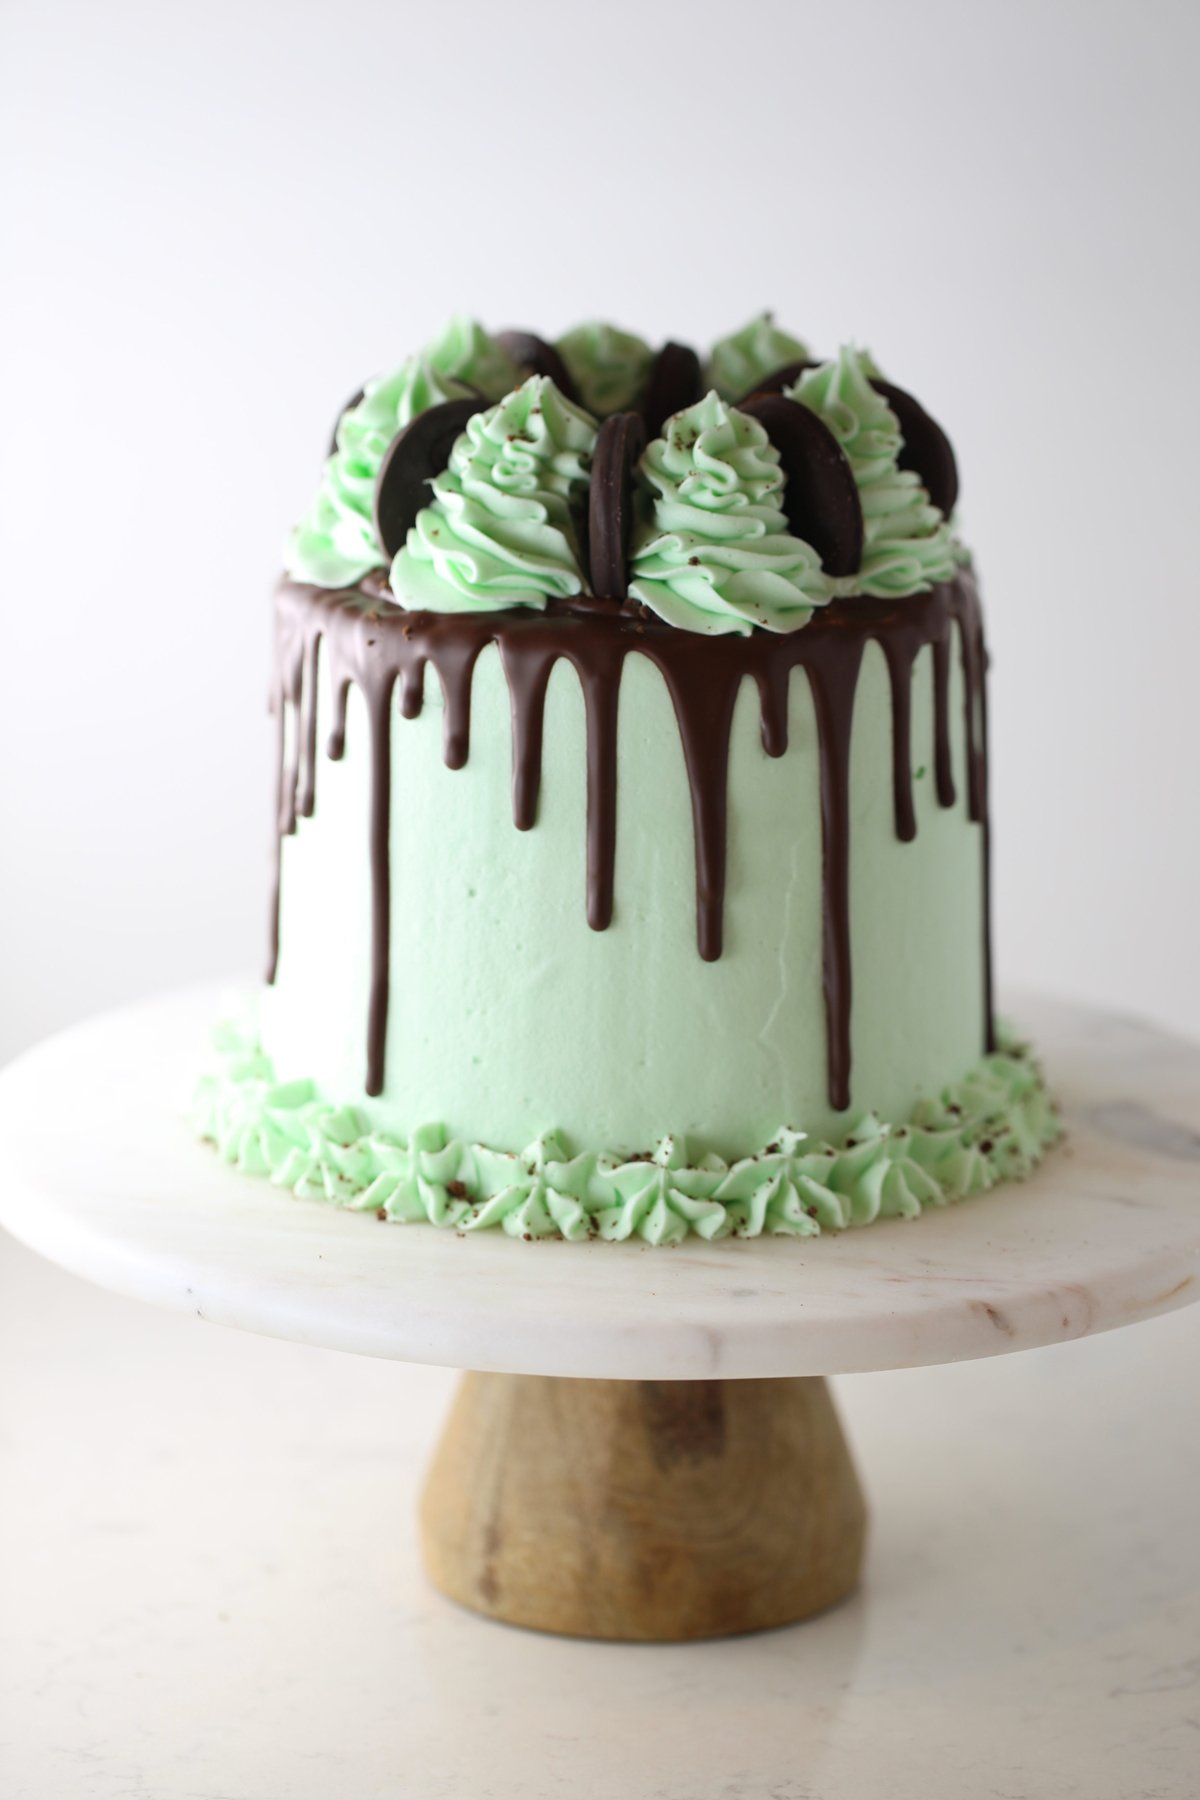 Girl Scout thin mint cake.